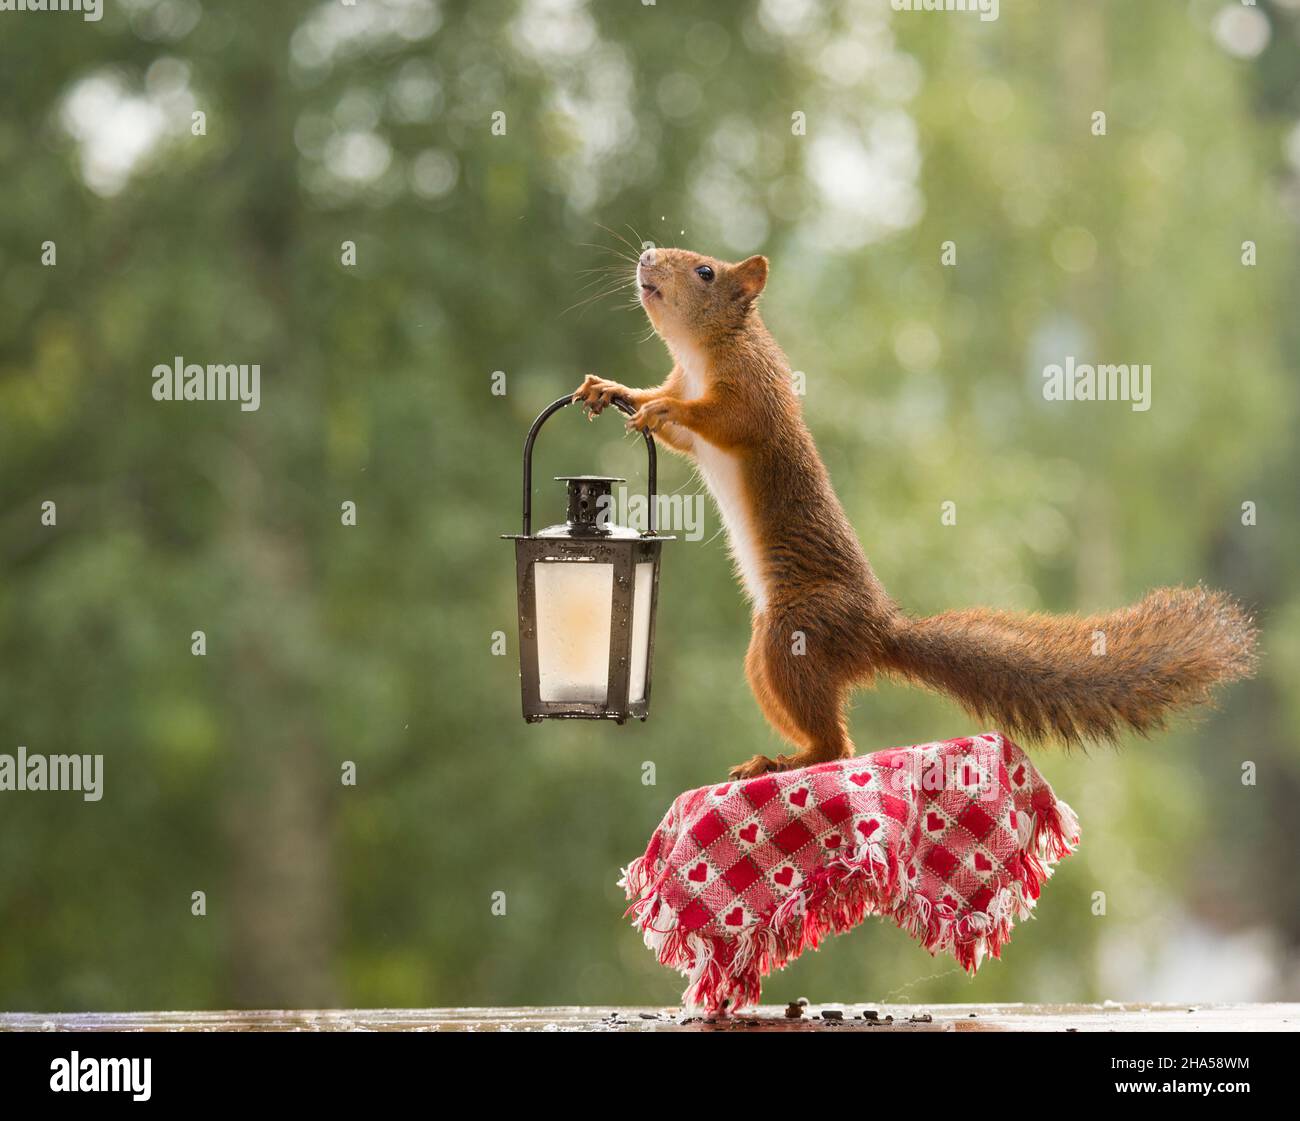 red squirrel hold an lantern on an a table Stock Photo